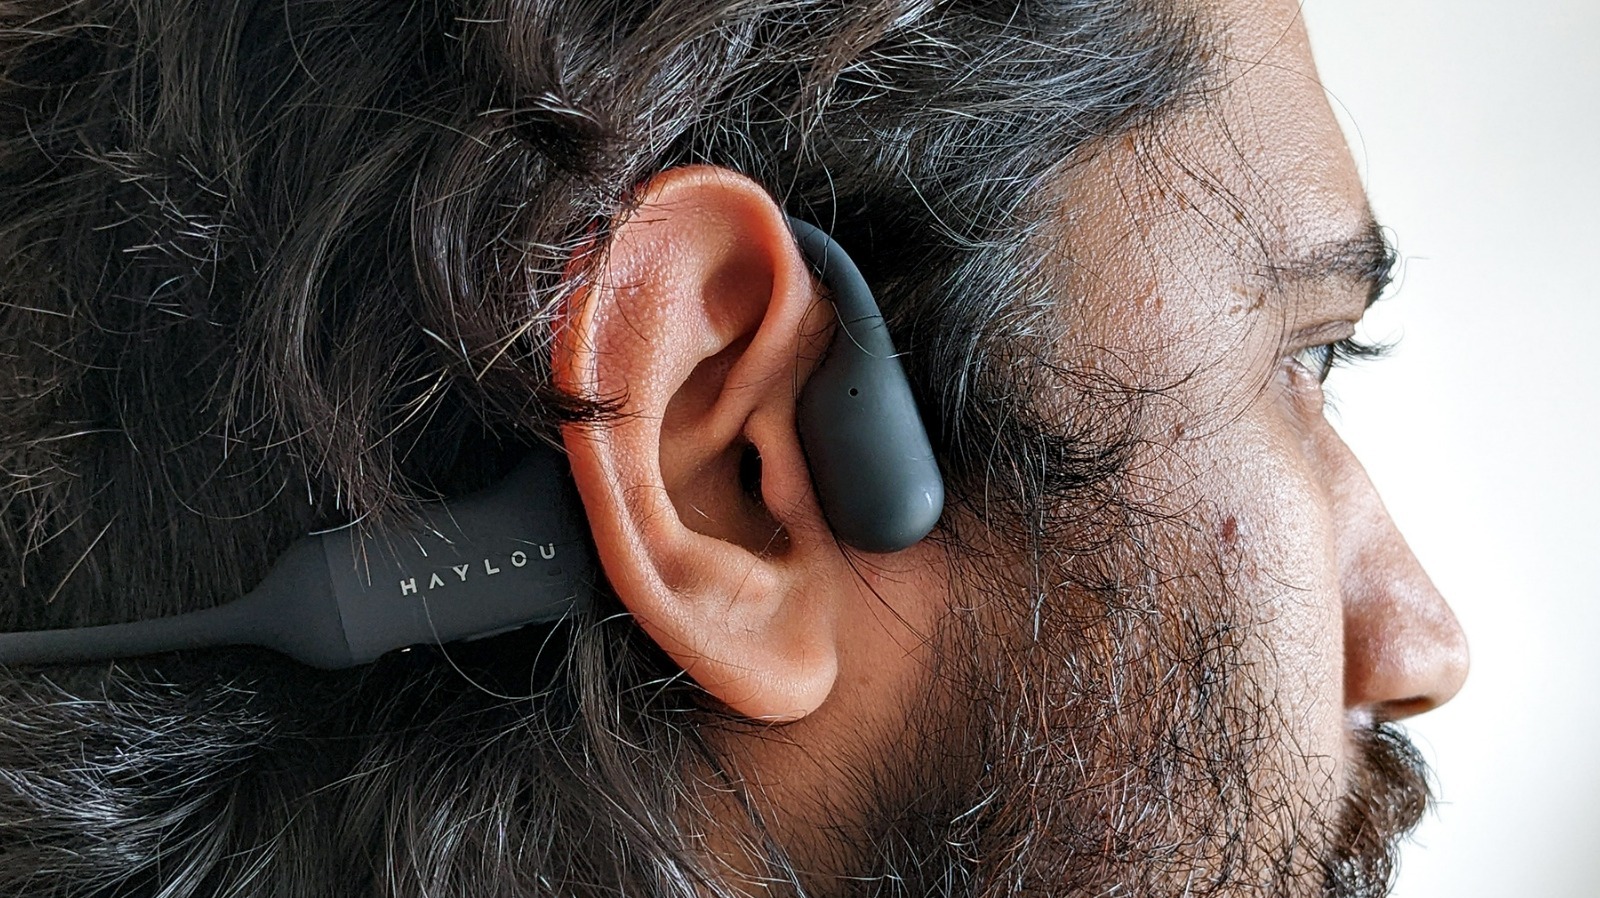 Haylou PurFree BC01 Review: Bone Conduction Headphones Made For Casual Outings – SlashGear